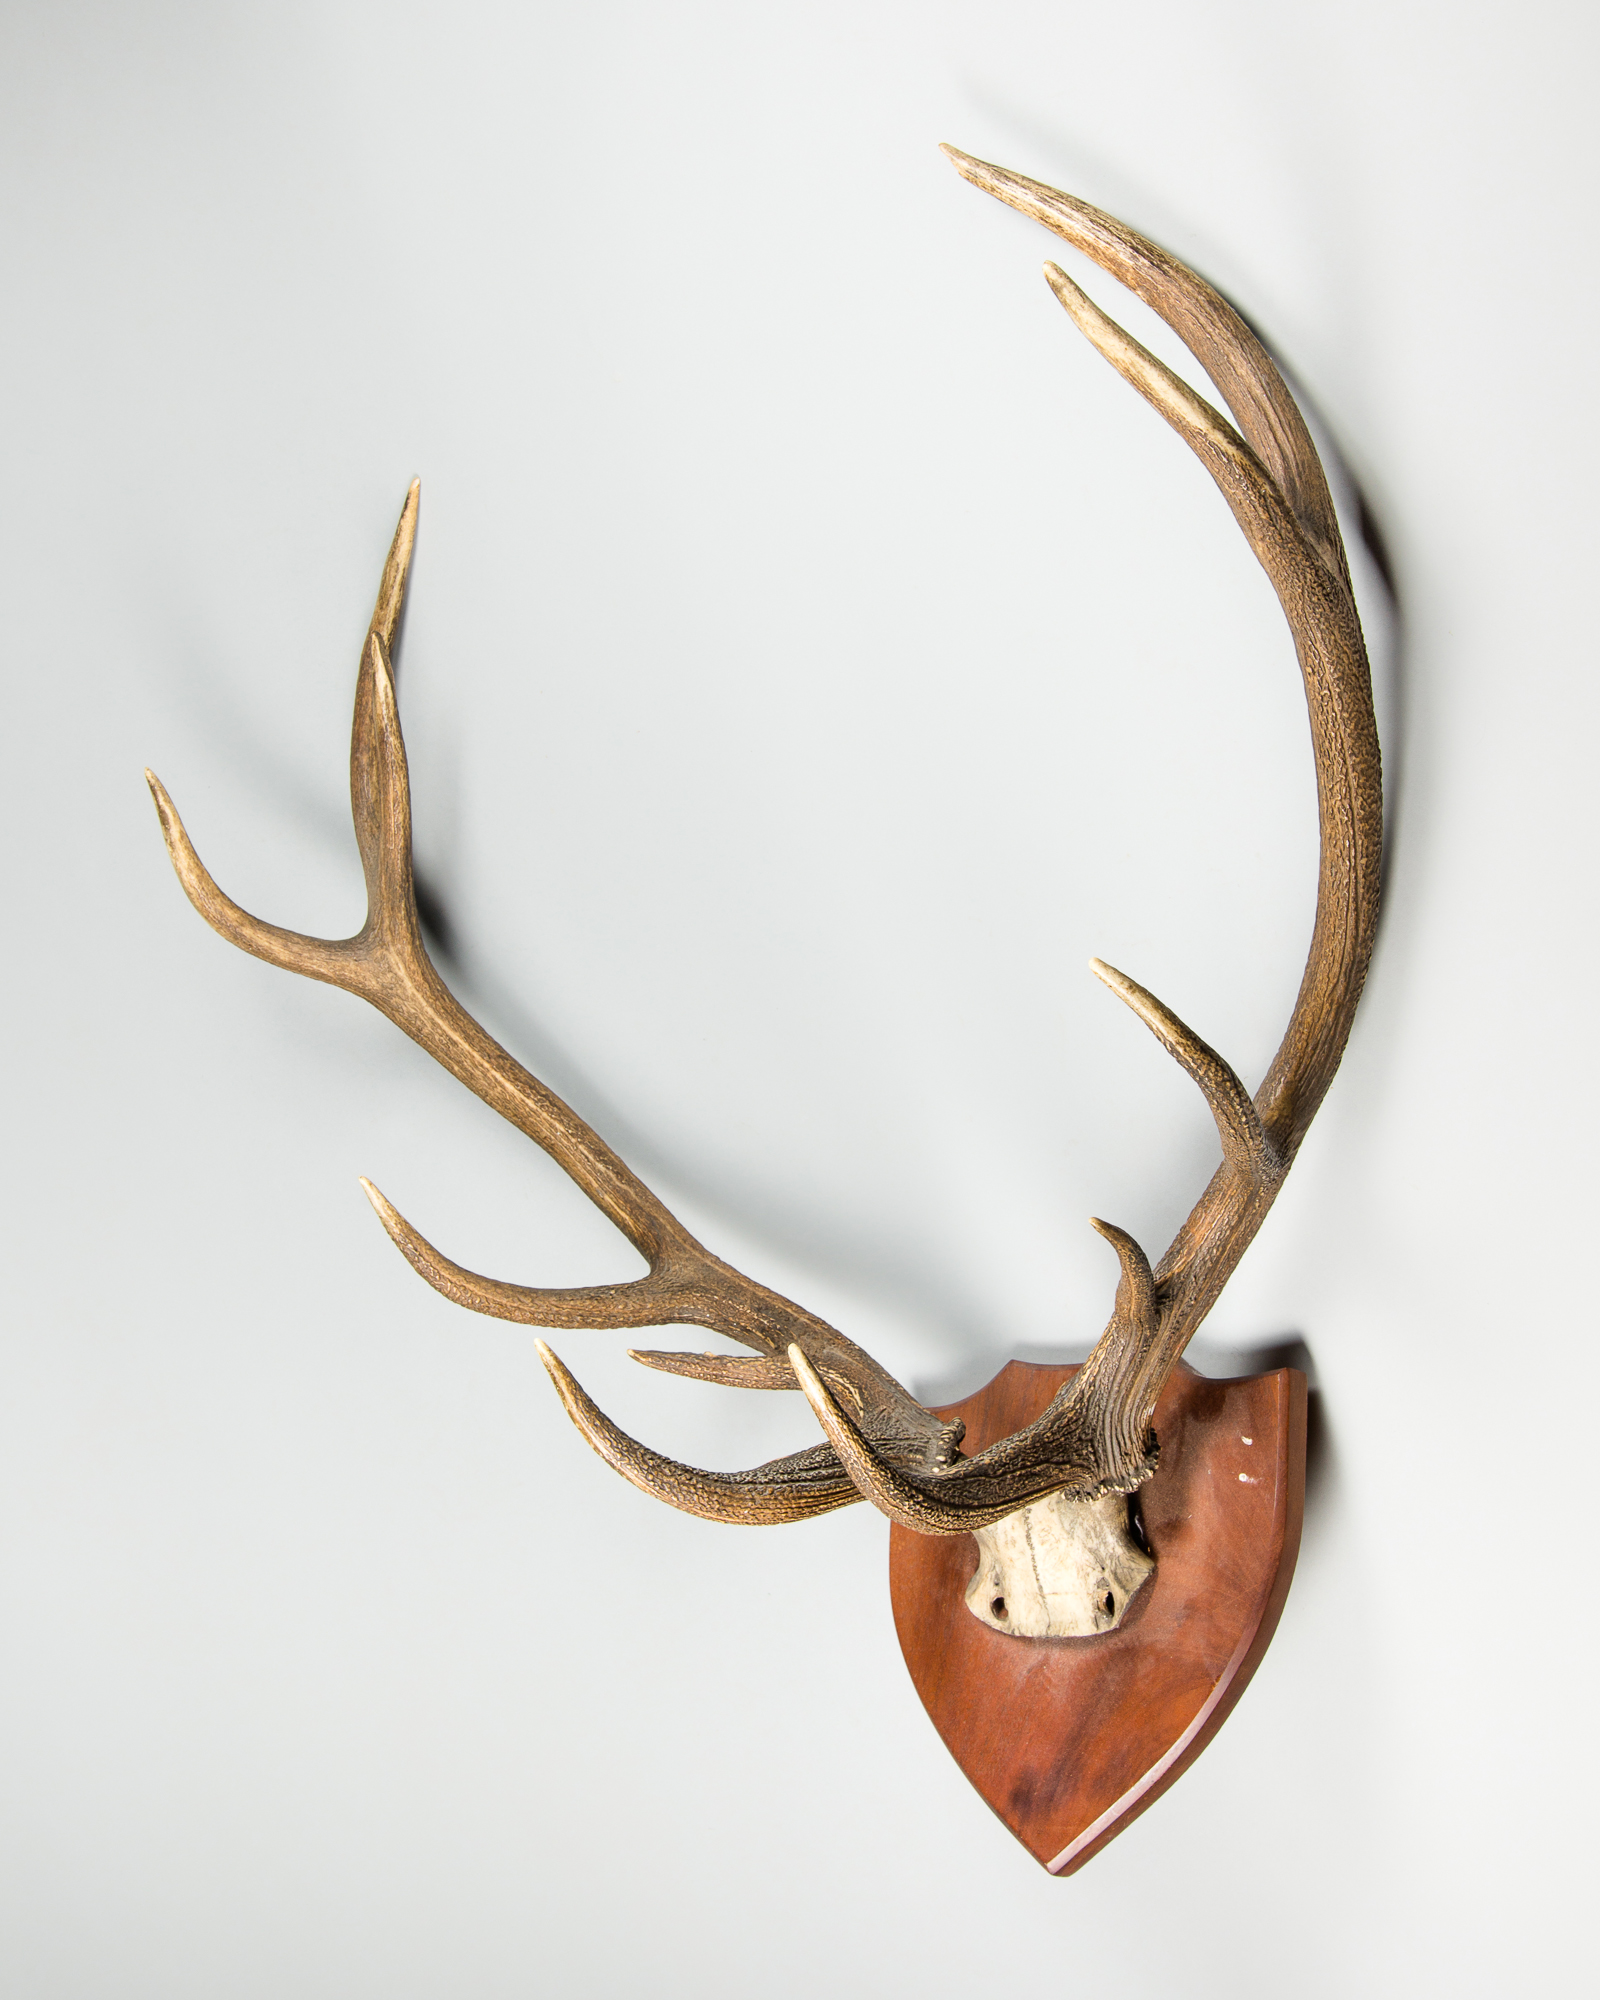 A 20TH CENTURY SET OF RED DEER ANTLERS UPON A WOODEN SHIELD (h 77cm x w 62cm x d 29cm)